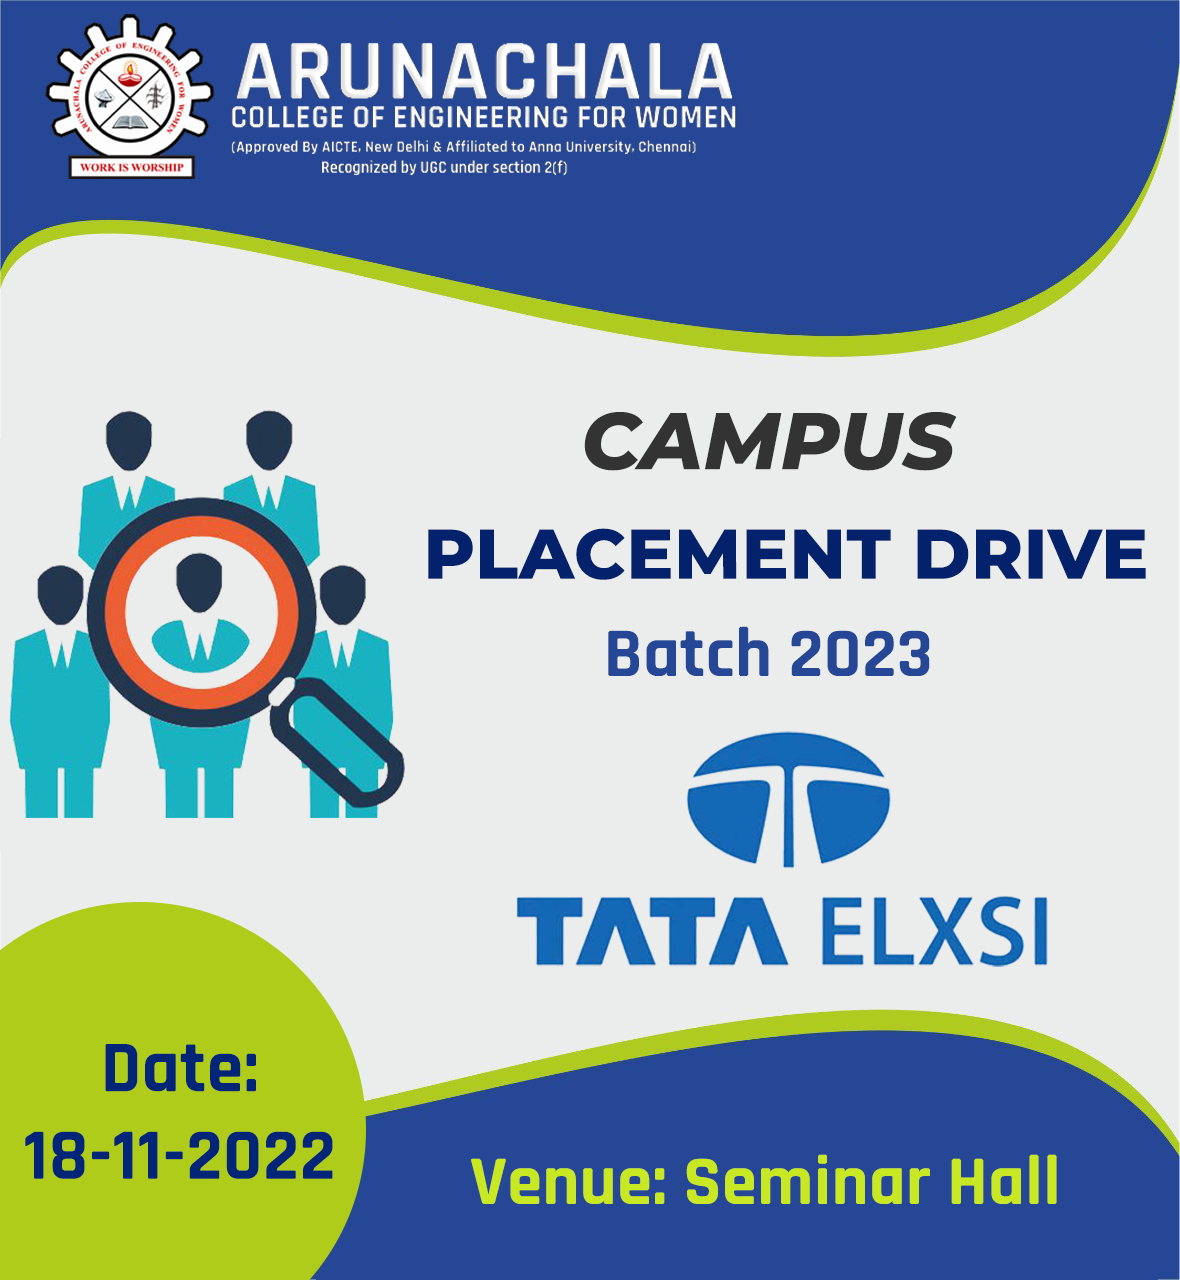 CAMPUS PLACEMENT DRIVE ON 18-11-2022.